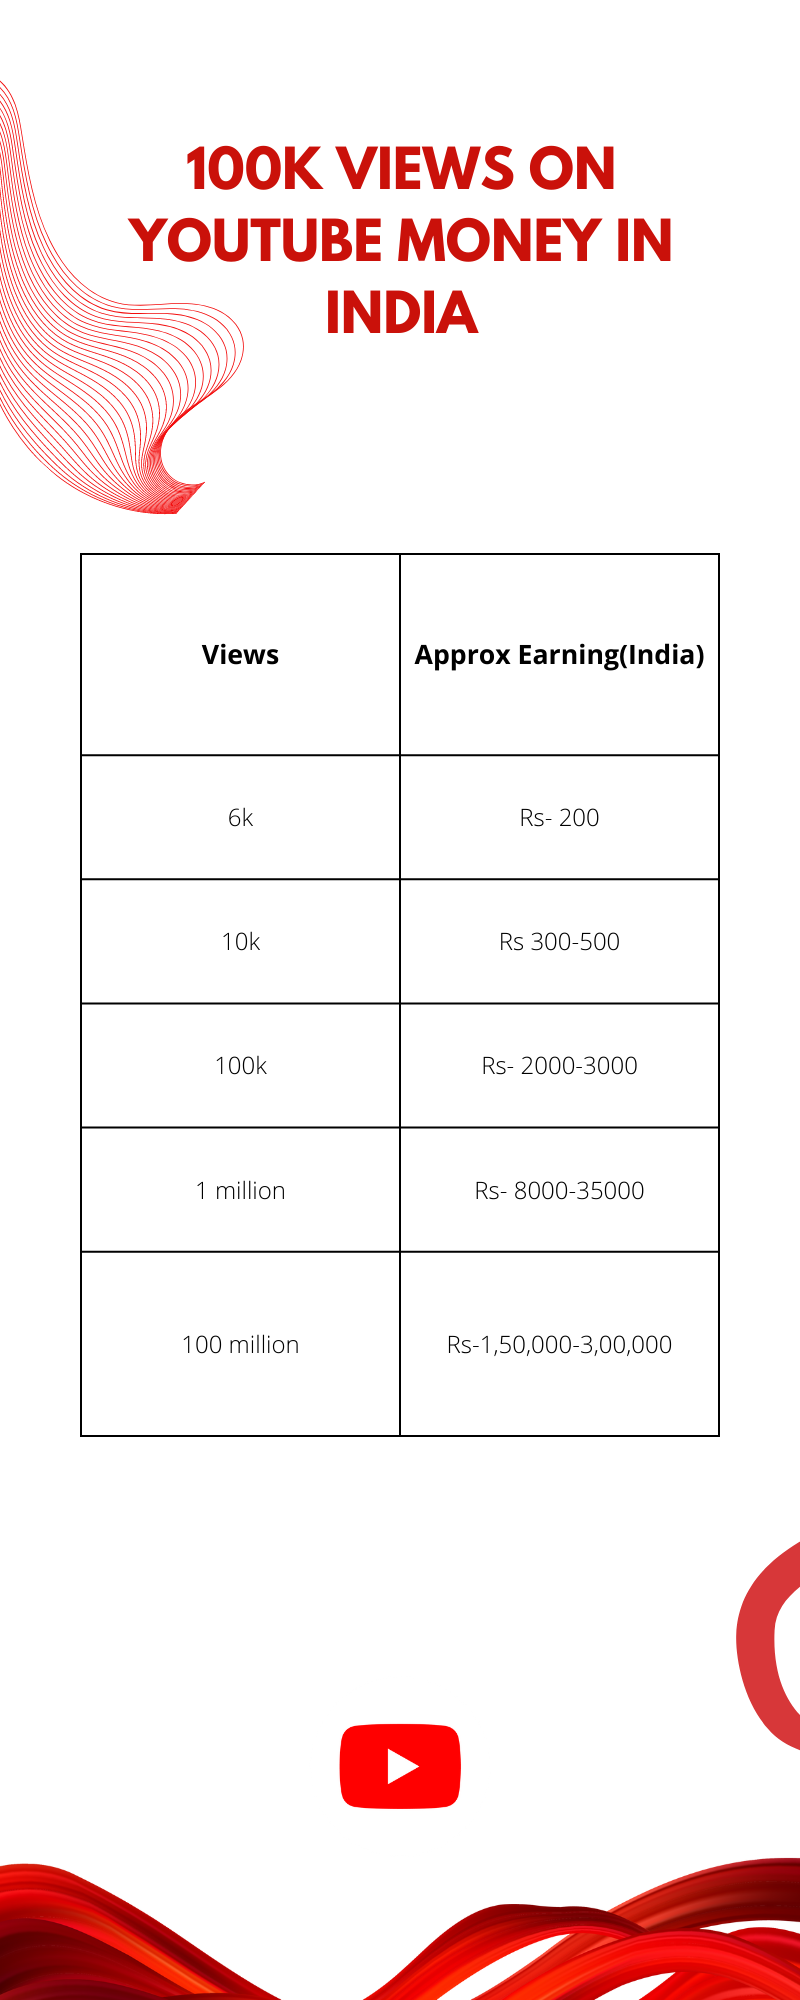 100K Views On YouTube Money In India